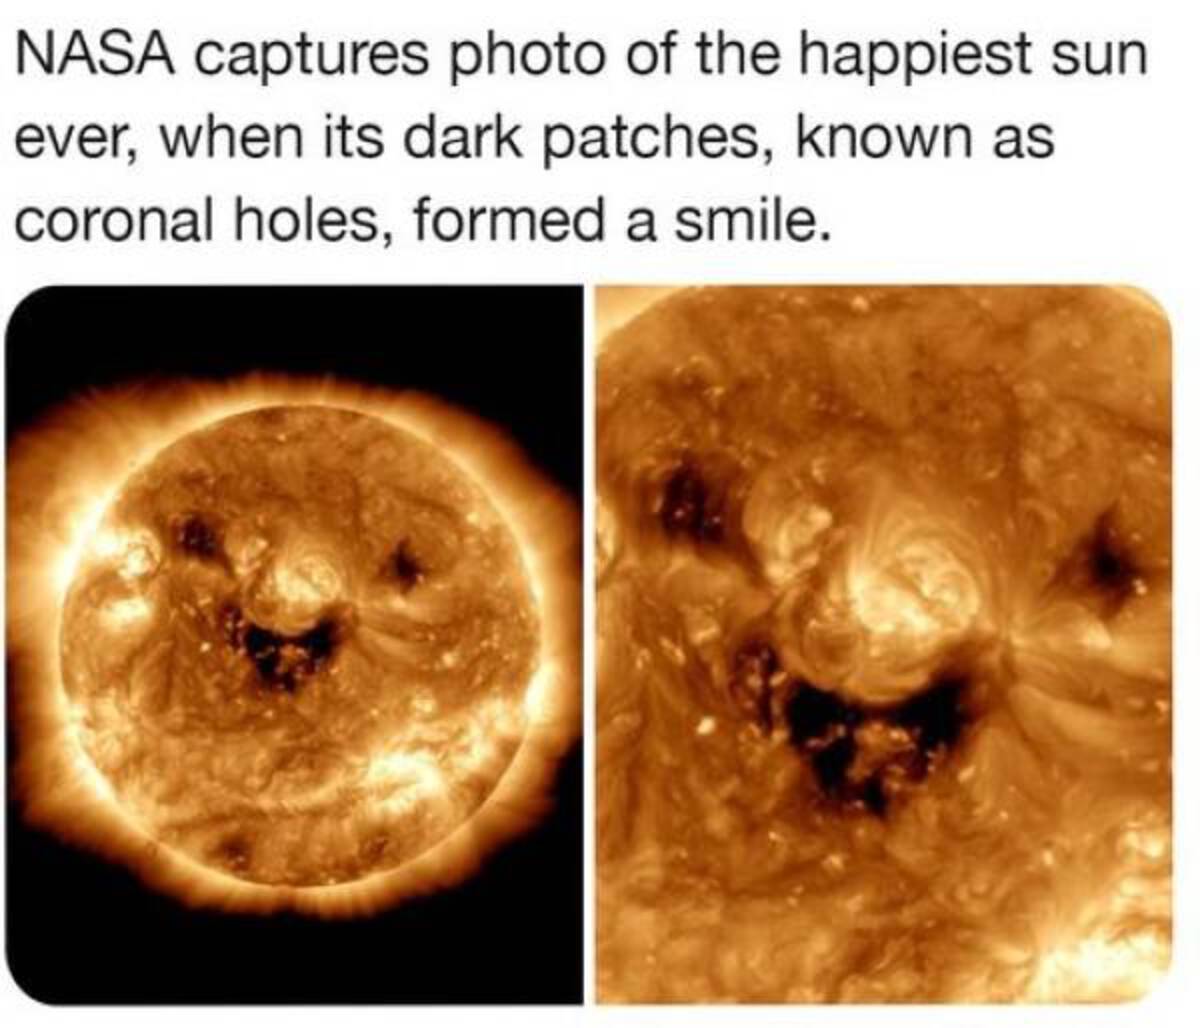 smiley sun nasa - Nasa captures photo of the happiest sun ever, when its dark patches, known as coronal holes, formed a smile.